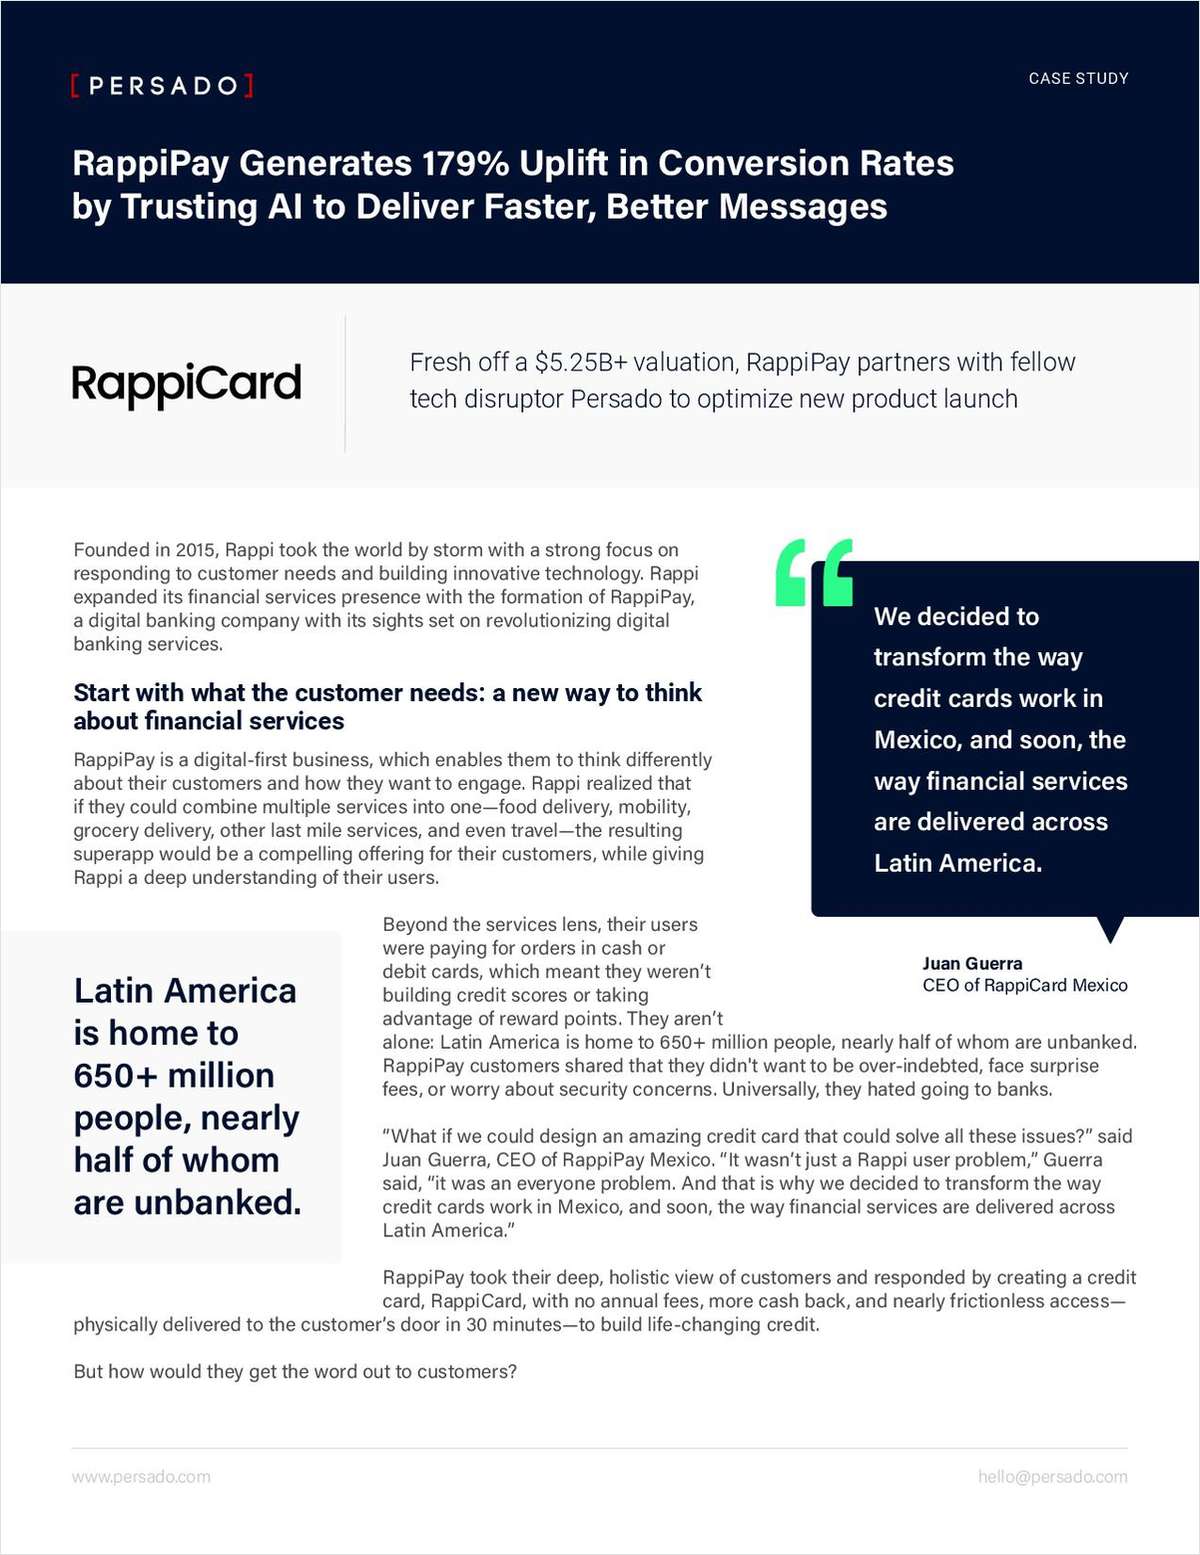 RappiPay Generates 179% Uplift in Conversion Rates Through Strategic Partnership with Persado